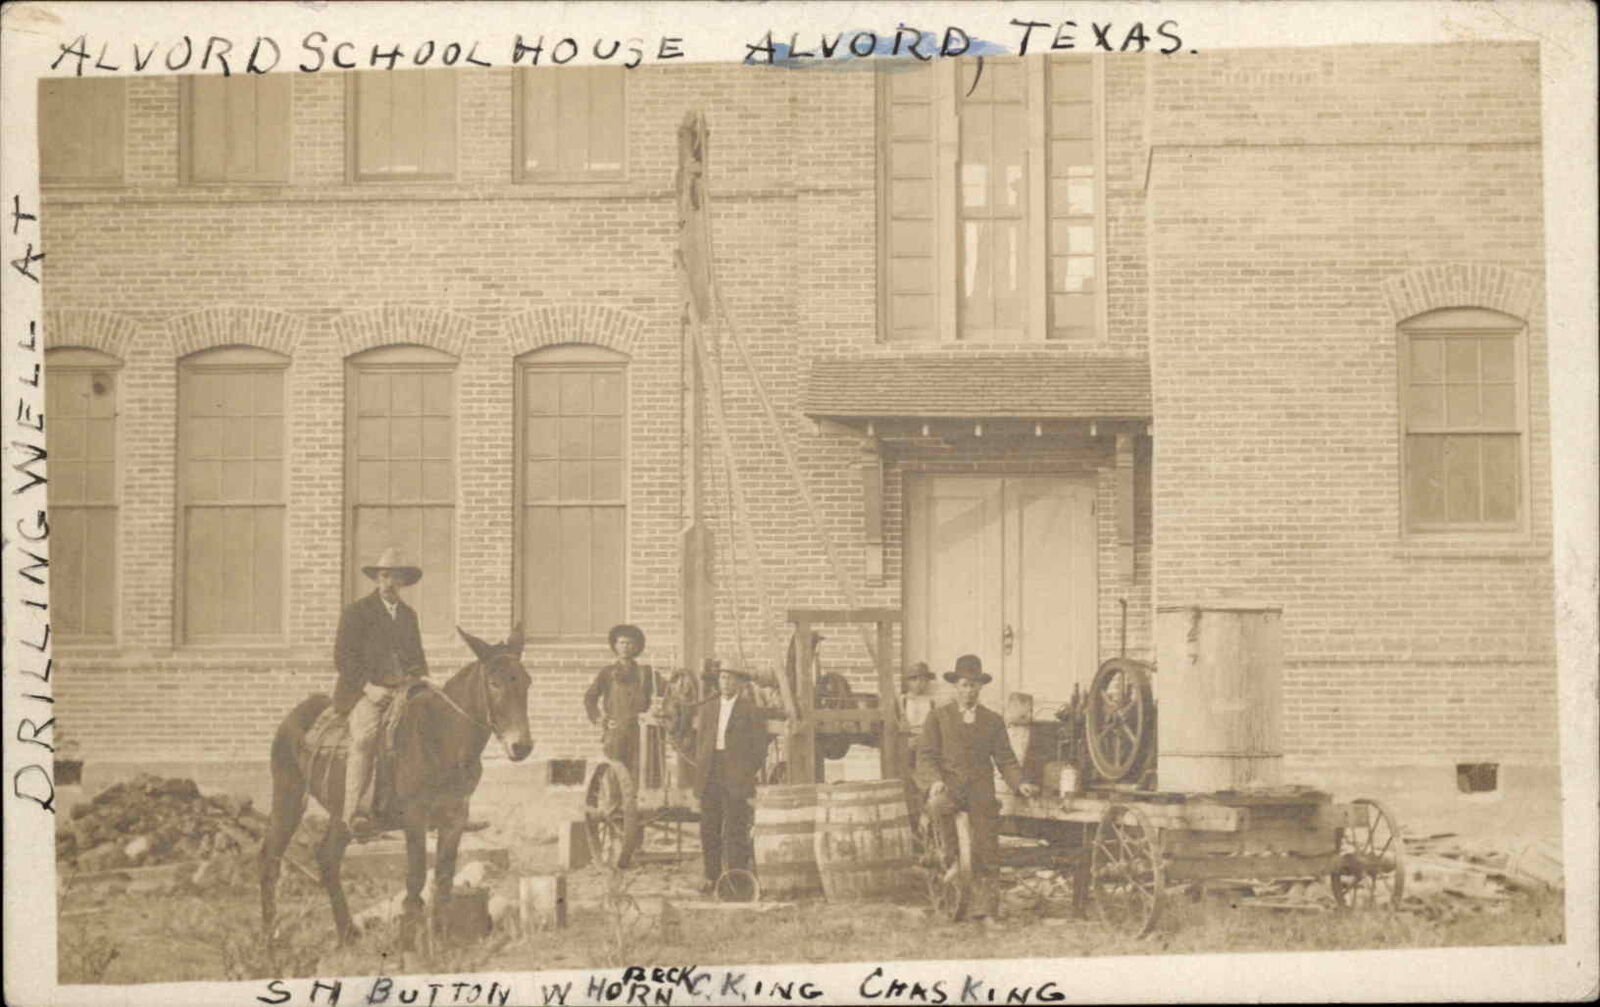 Alvord Texas TX Wise County Drilling Well Front of School RPPC Oil or Water?